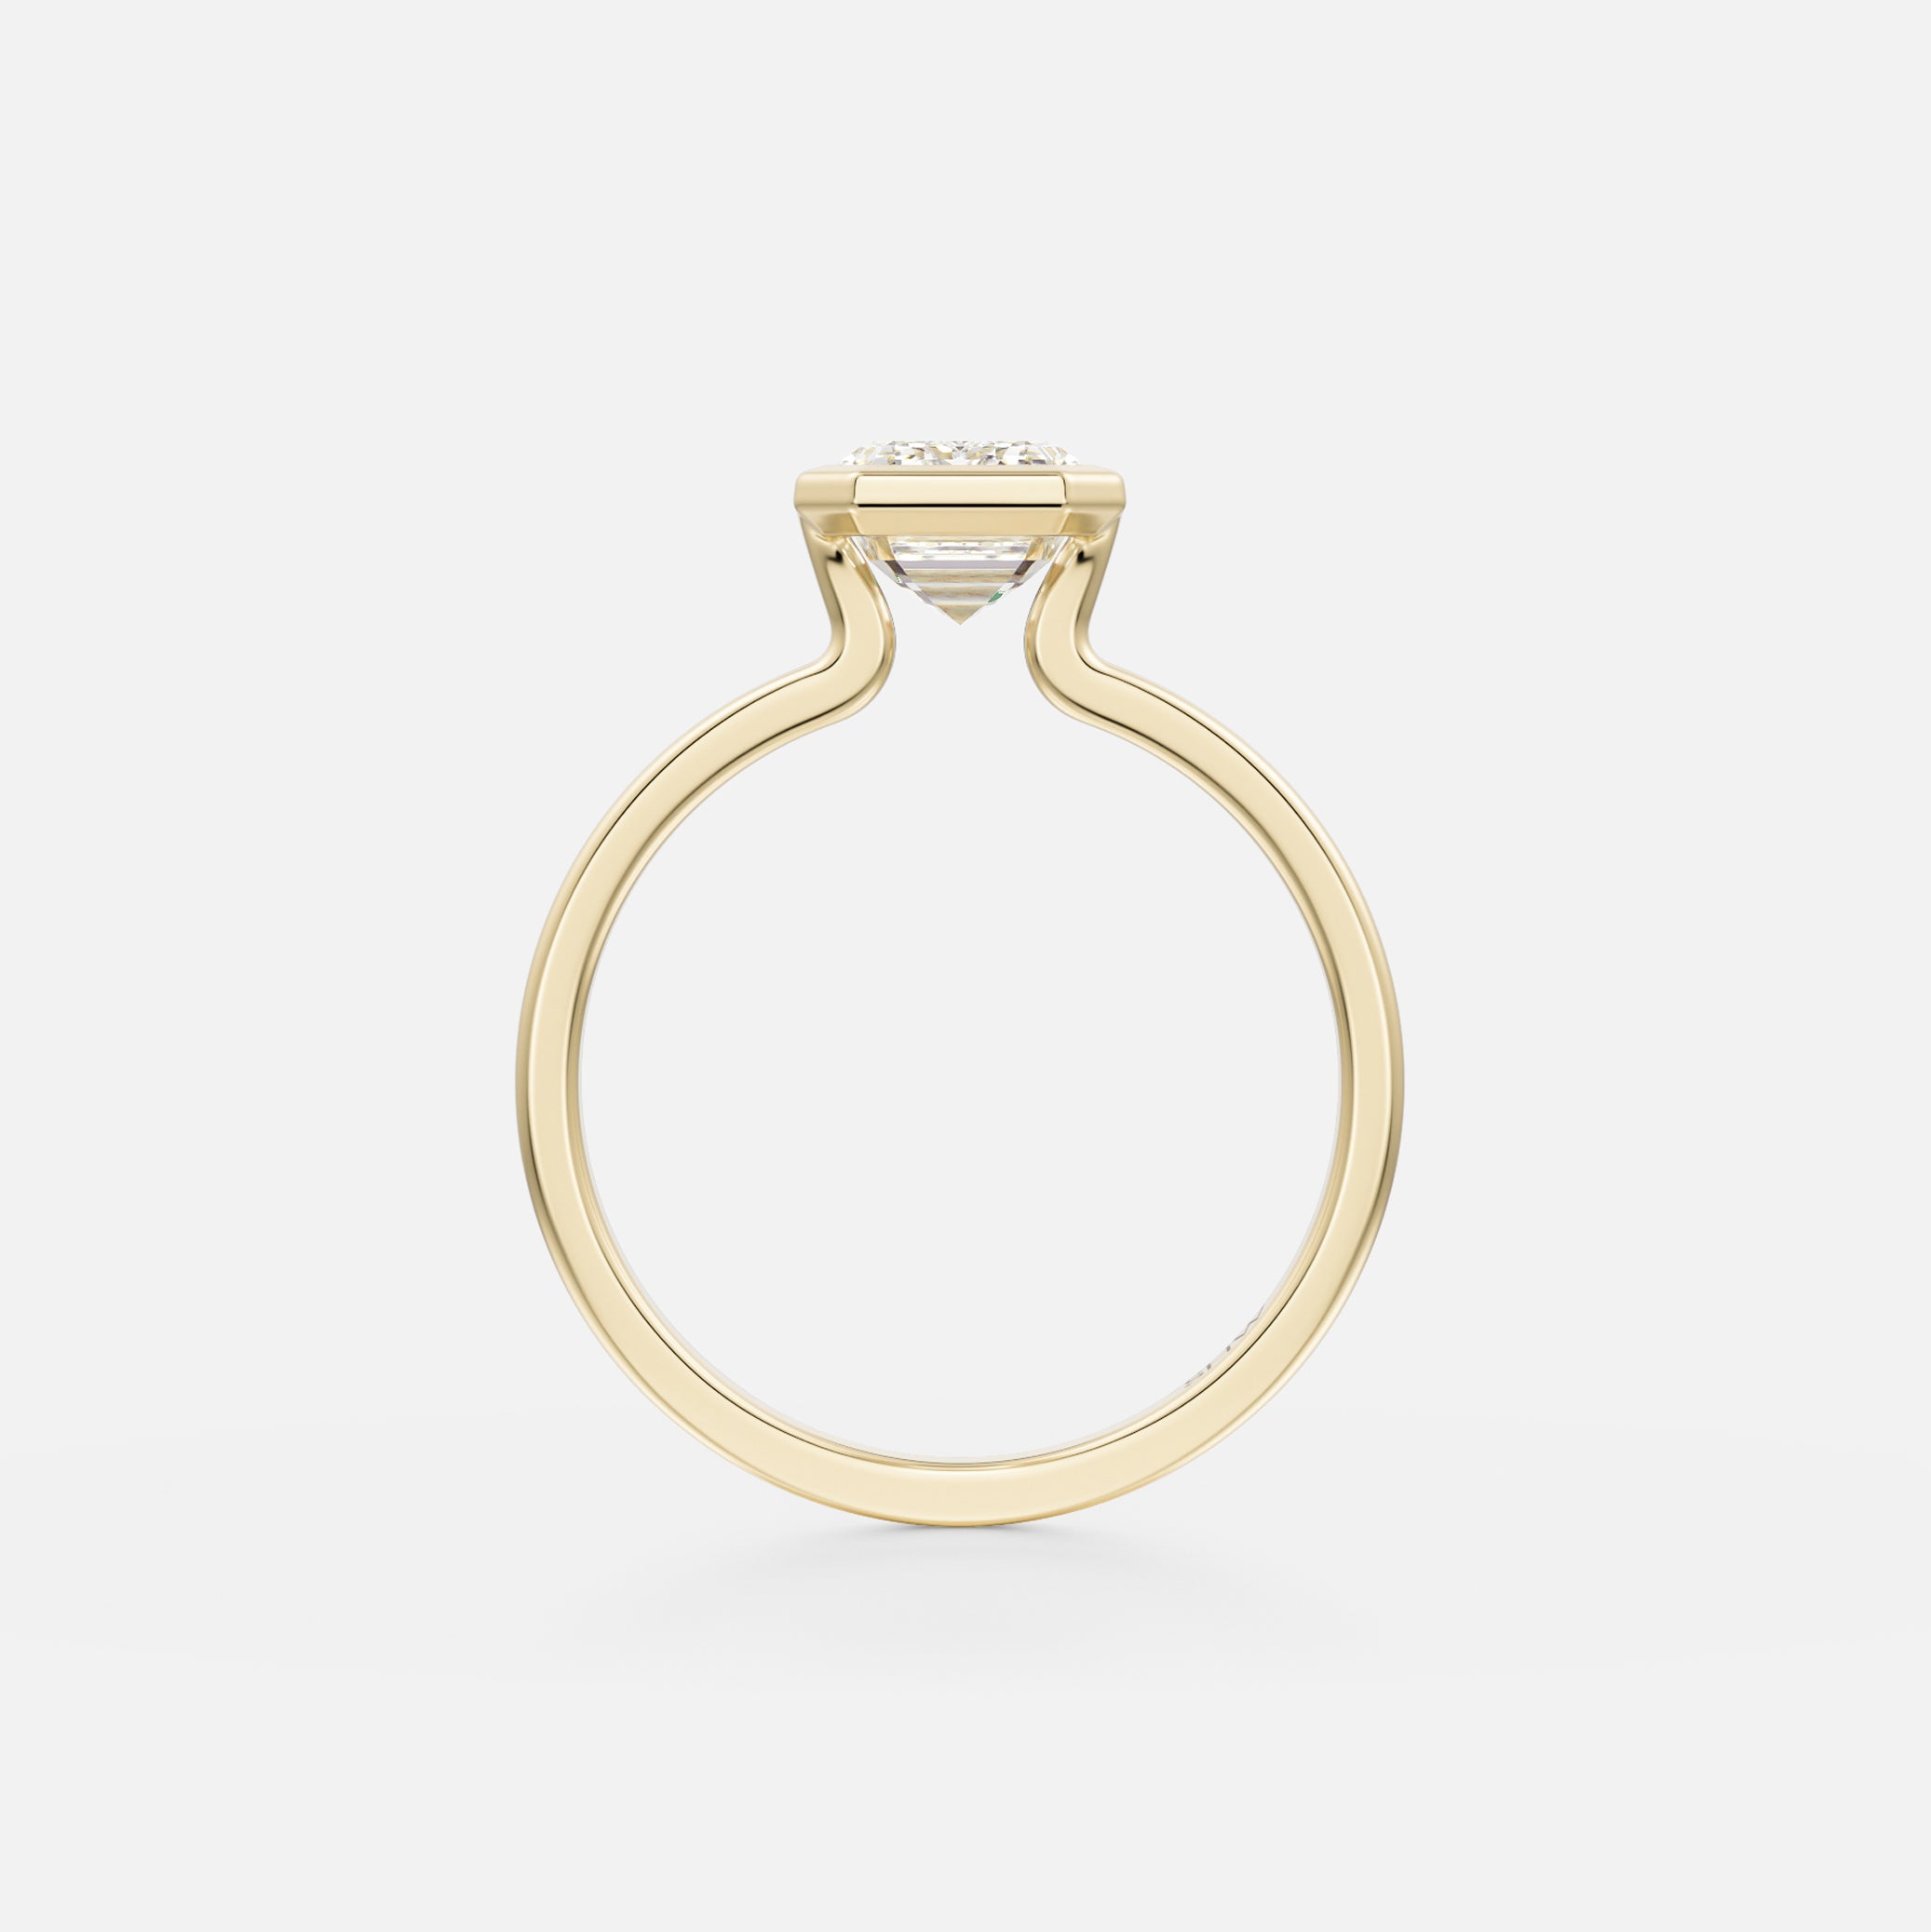 Mana Thin Flat Band with North South Emerald Modern Engagement Ring Setting in 14 karat yellow, white or rose Gold or platinum handmade by SHW Fine Jewelry NYC